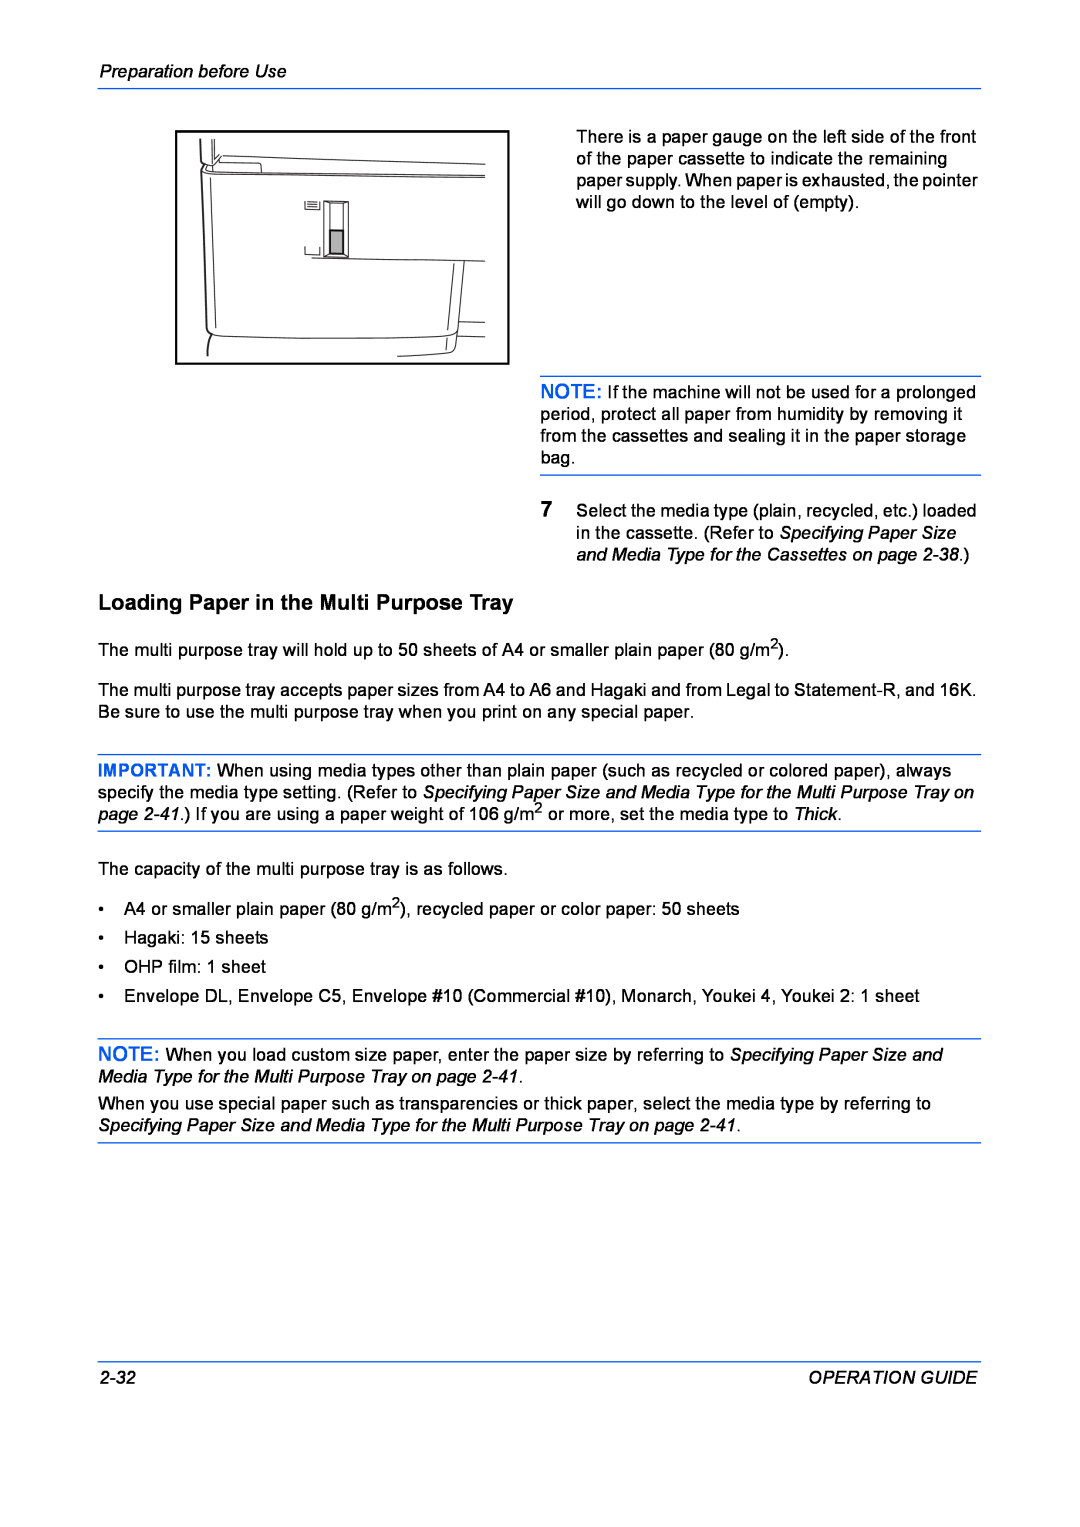 Kyocera FS-1028MFP, FS-1128MFP manual Loading Paper in the Multi Purpose Tray, Preparation before Use, 2-32, Operation Guide 